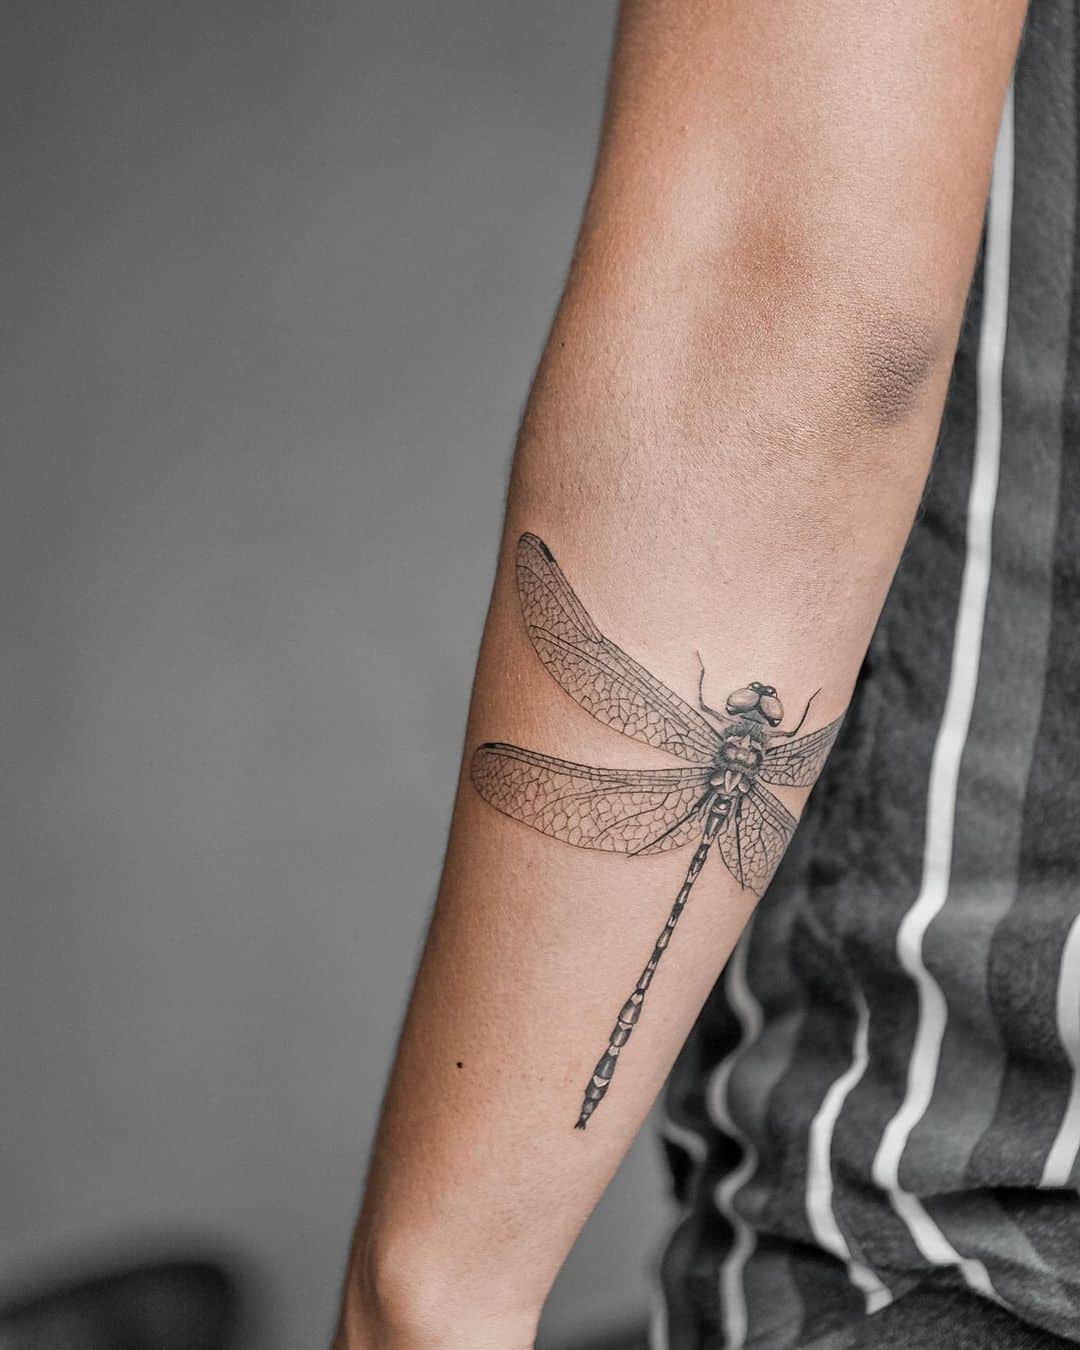 Dragonfly tattoo for guys